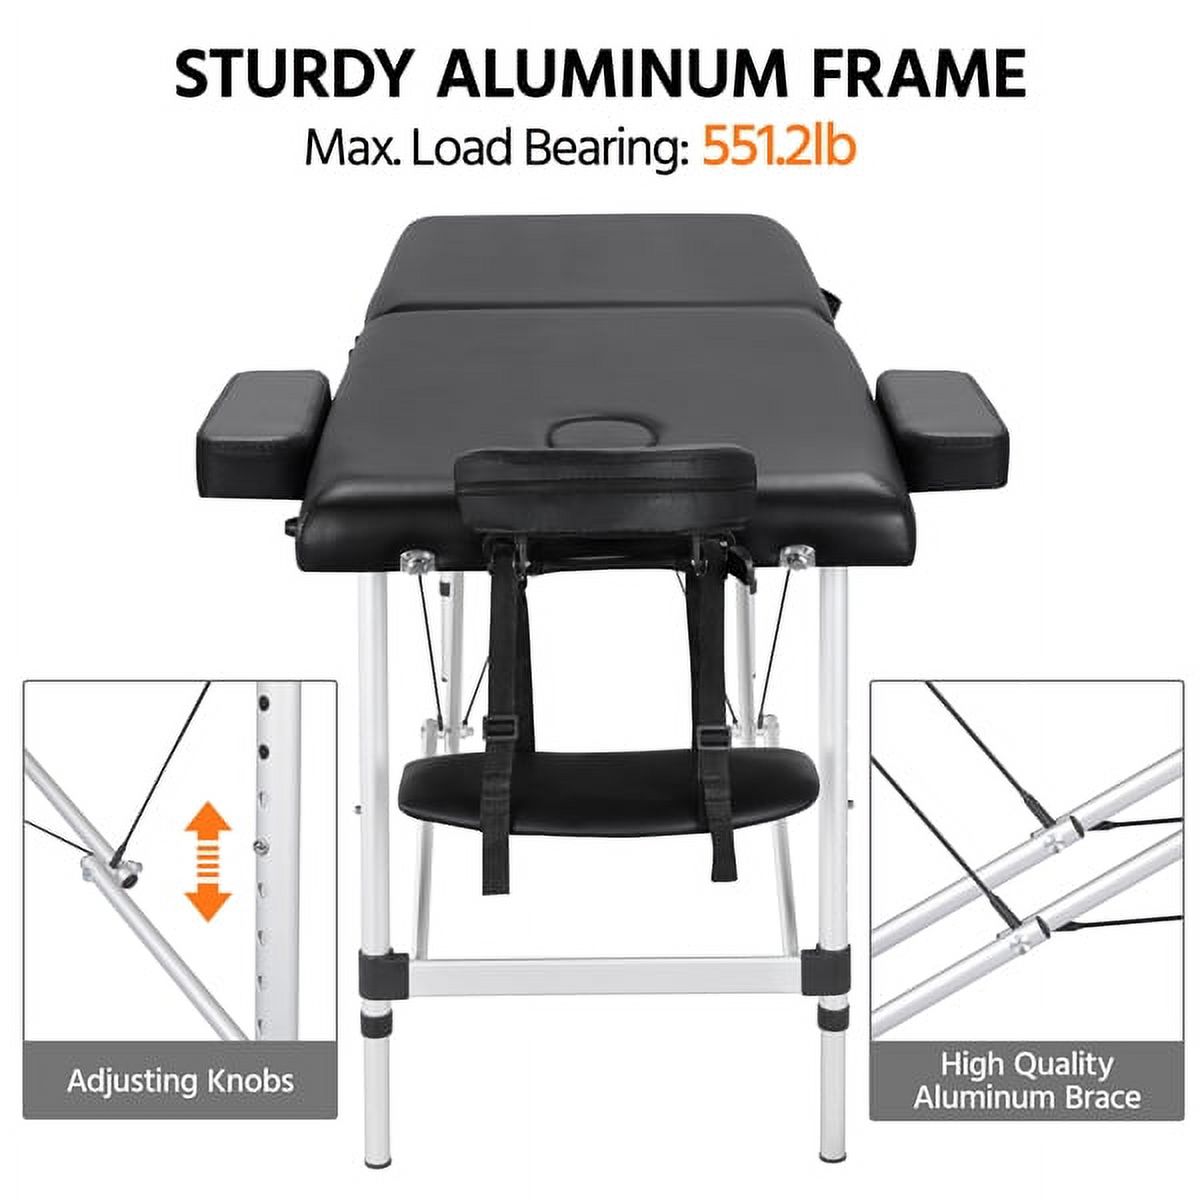 SmileMart 3 Section 84" Portable Adjustable Aluminum  Massage Table for Spa Treatments, Black - image 4 of 13